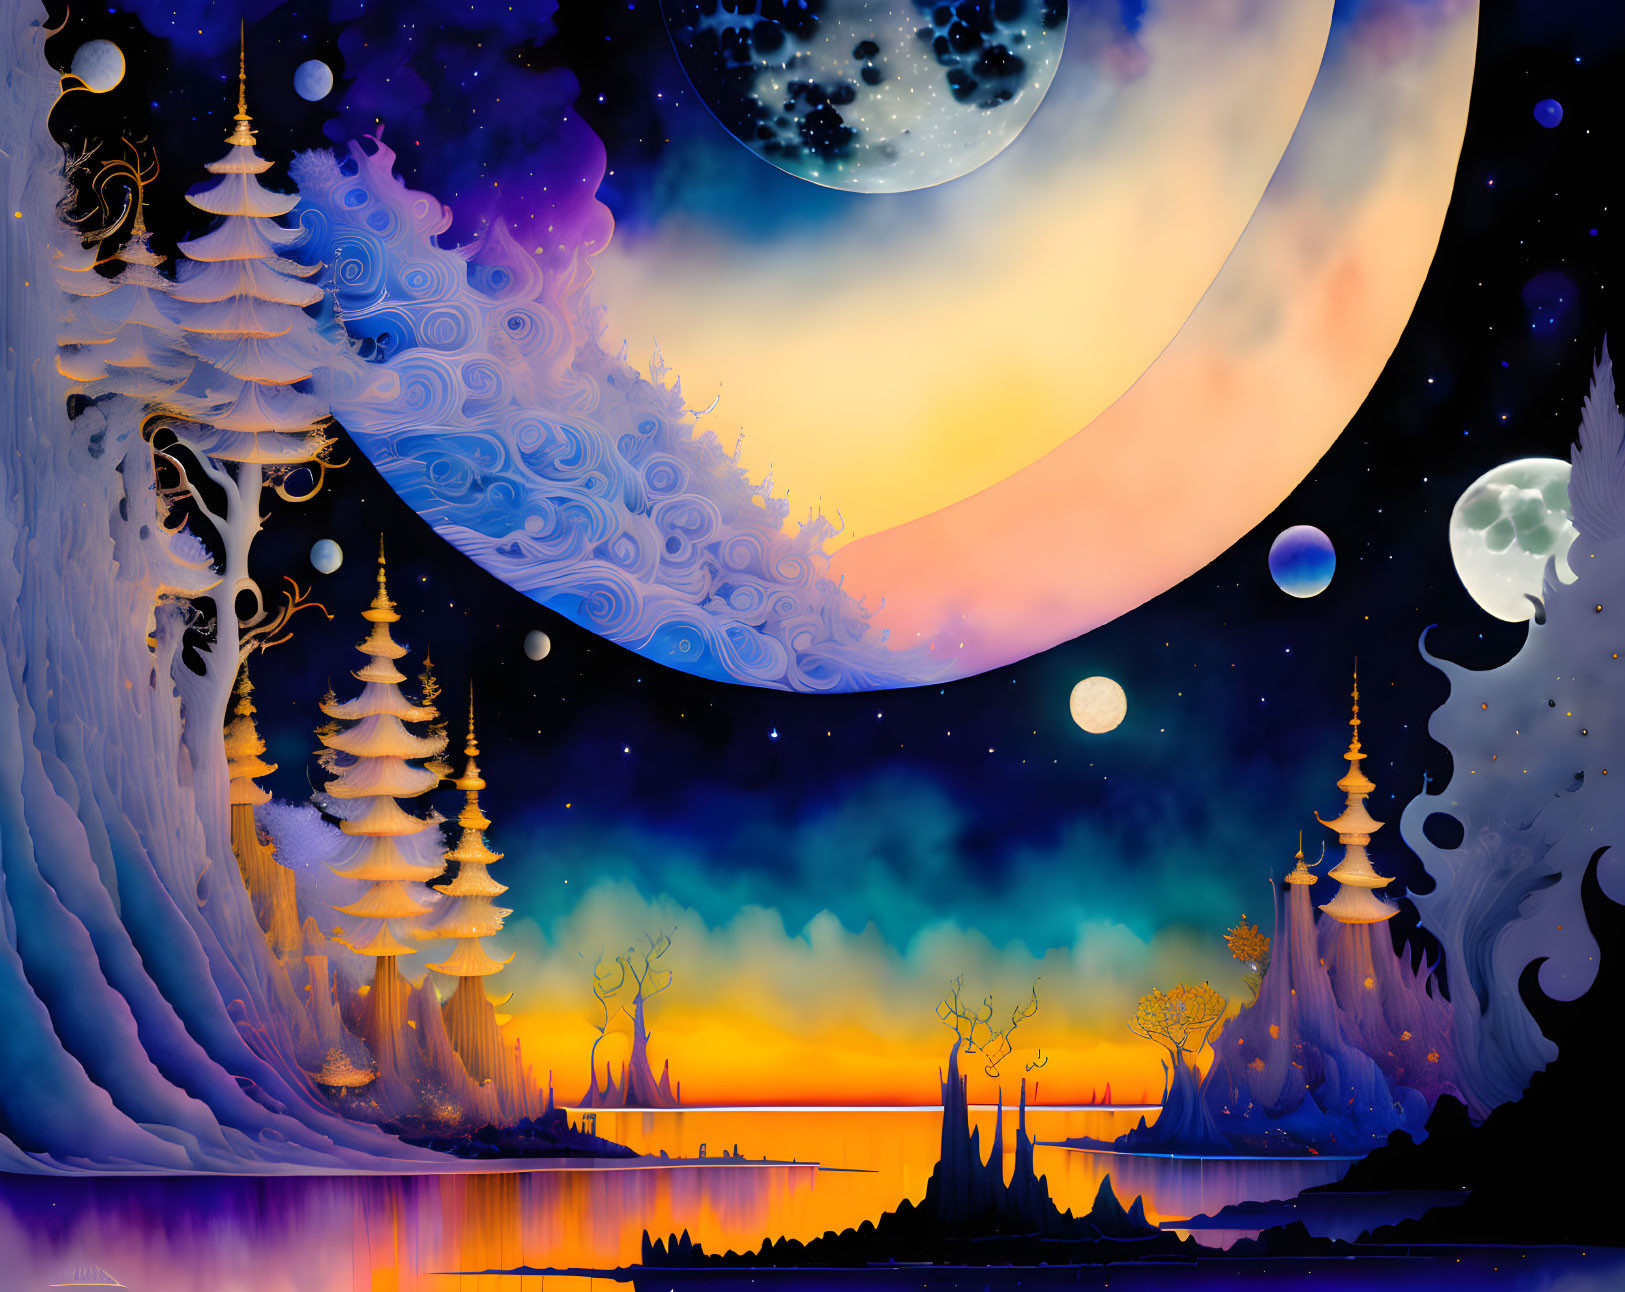 Vibrant sunset over fantasy landscape with silhouetted trees and celestial bodies